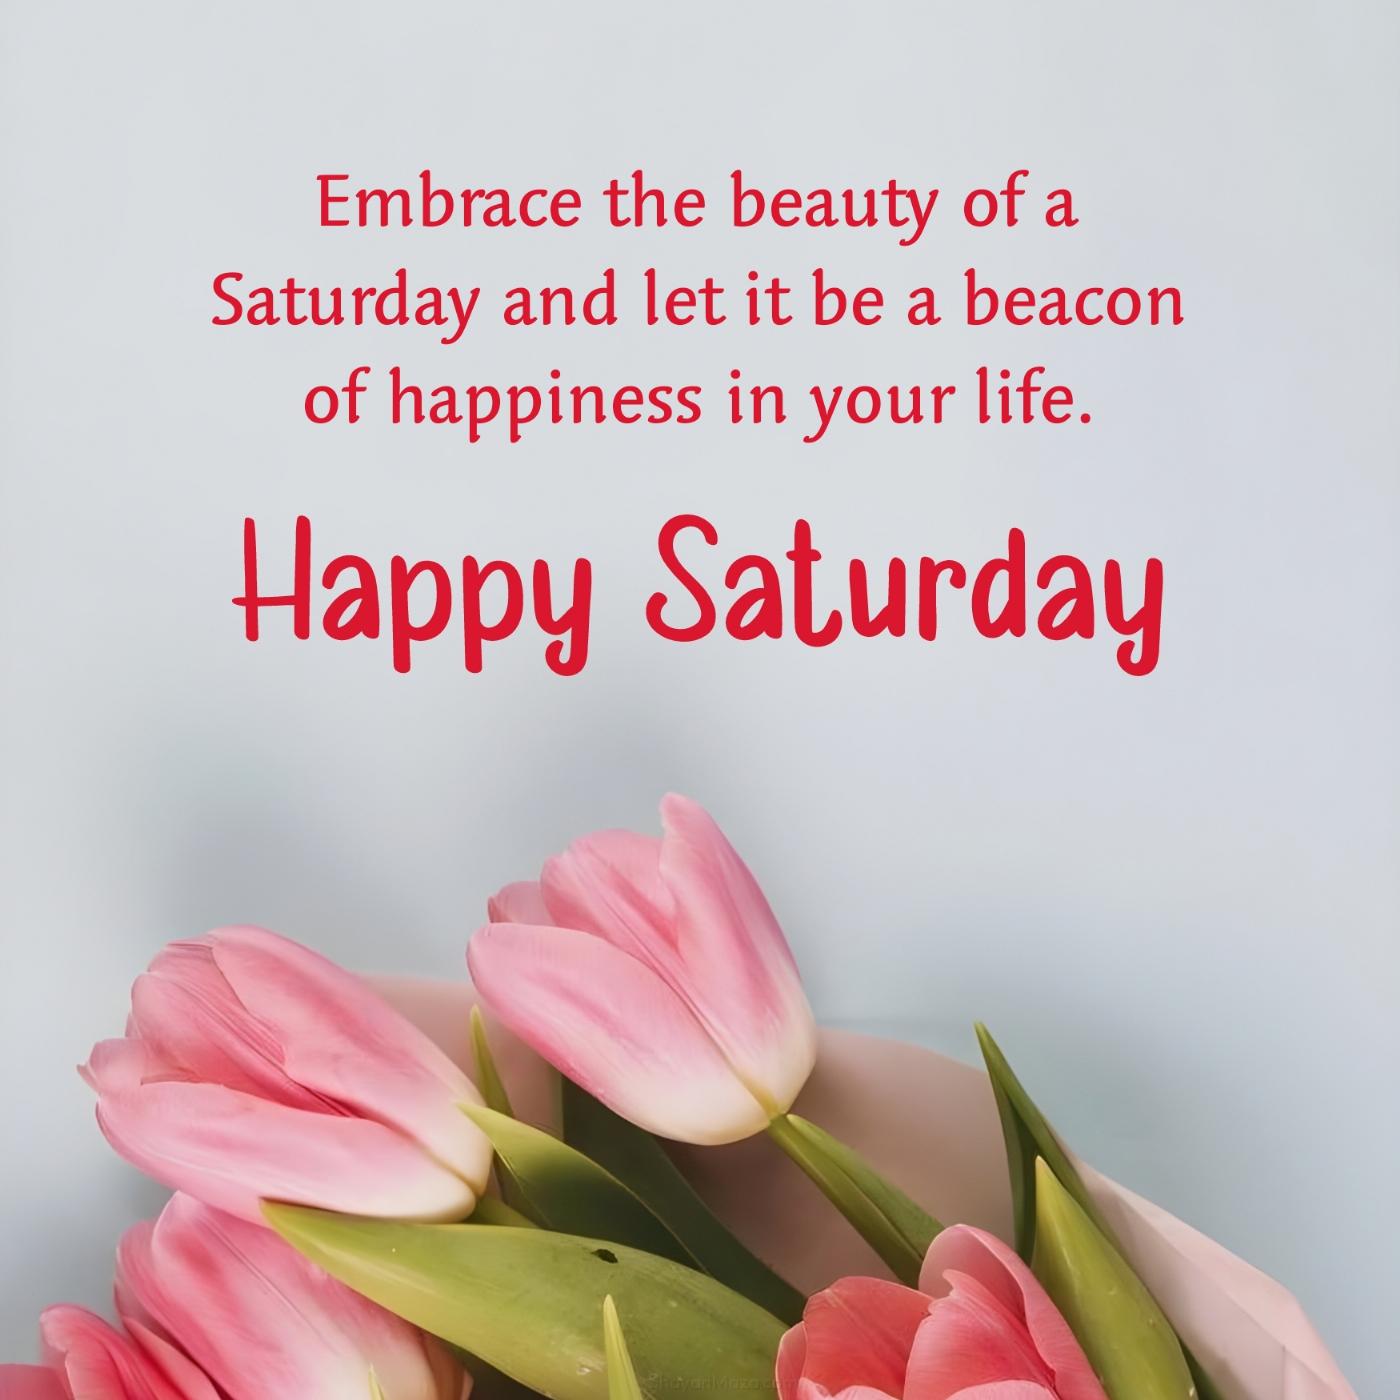 Embrace the beauty of a Saturday and let it be a beacon